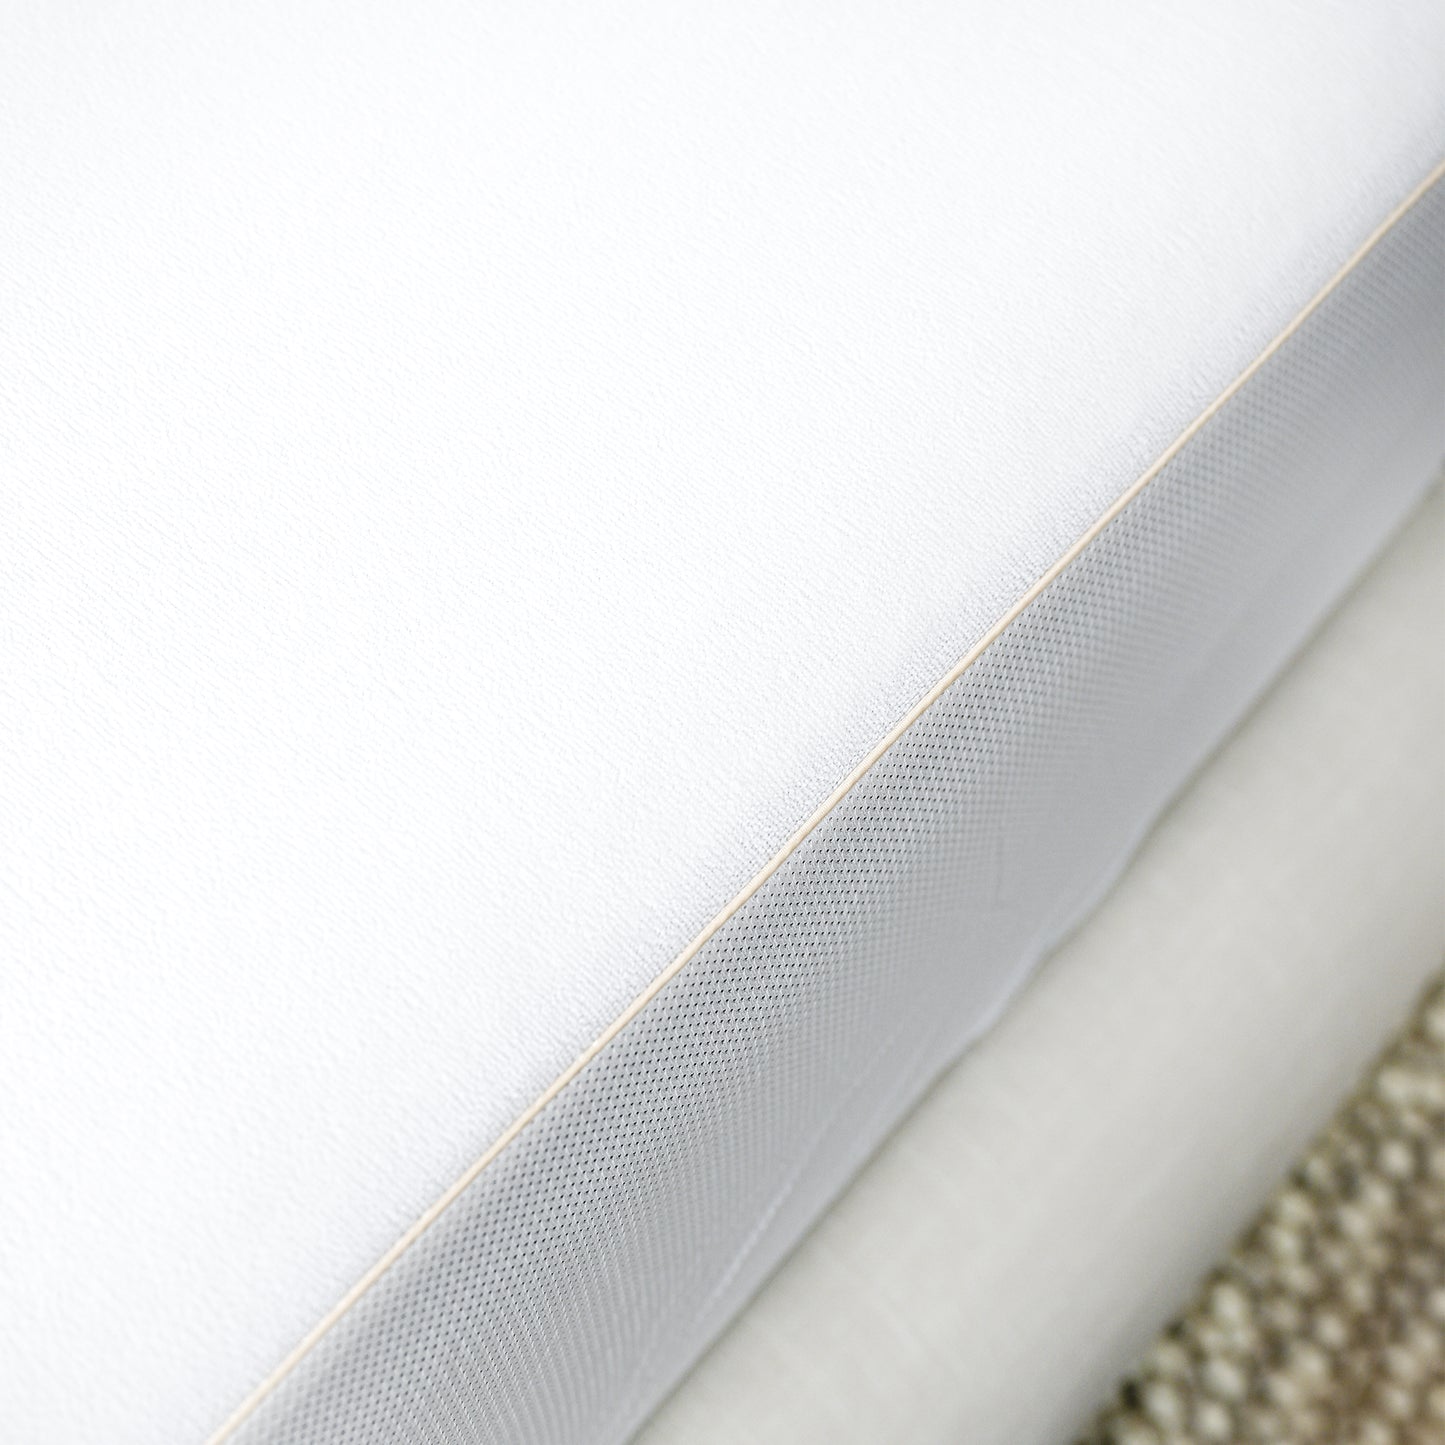 Terry Antimicrobial Waterproof Fitted Mattress Cover